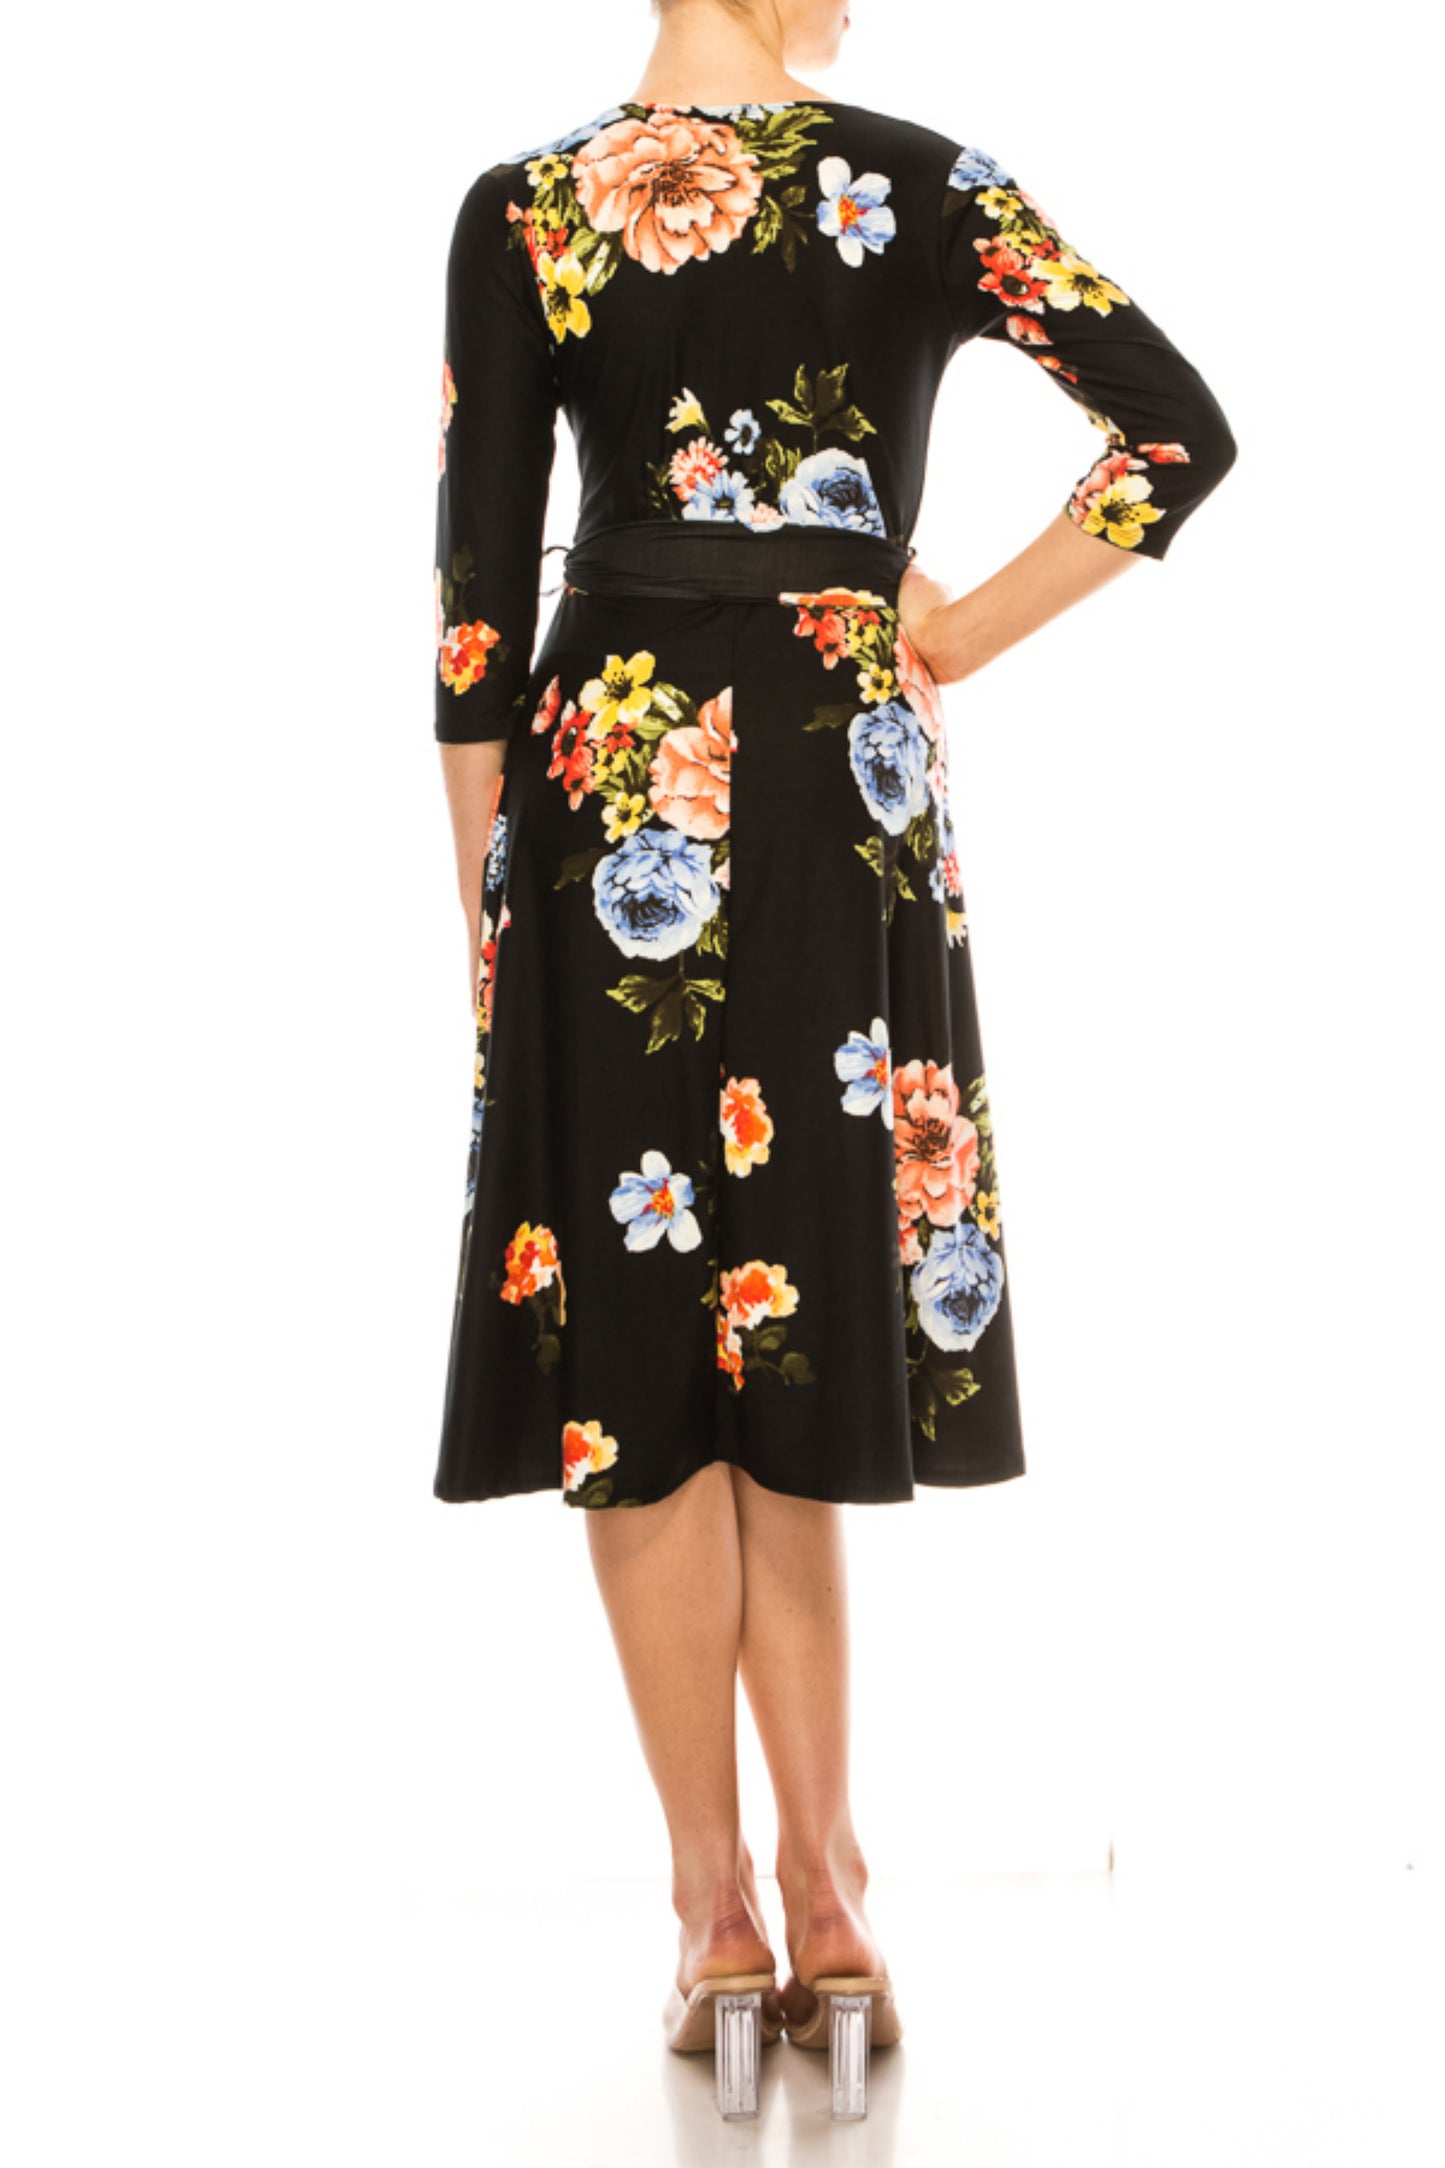 Women's Floral Print Faux Wrap Dress with Deep V-neck and Waist Tie